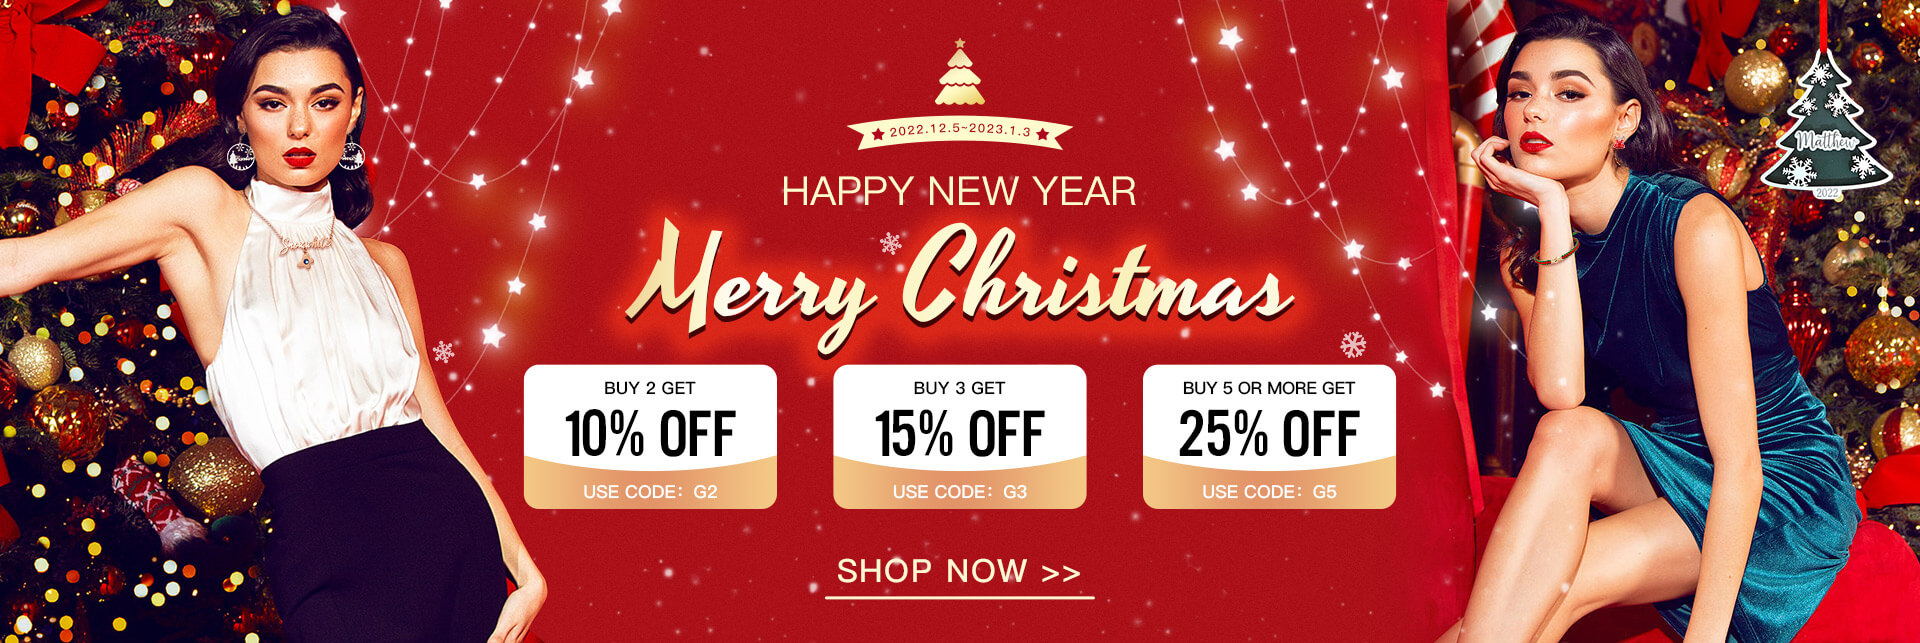 Christmas&New Year Sale